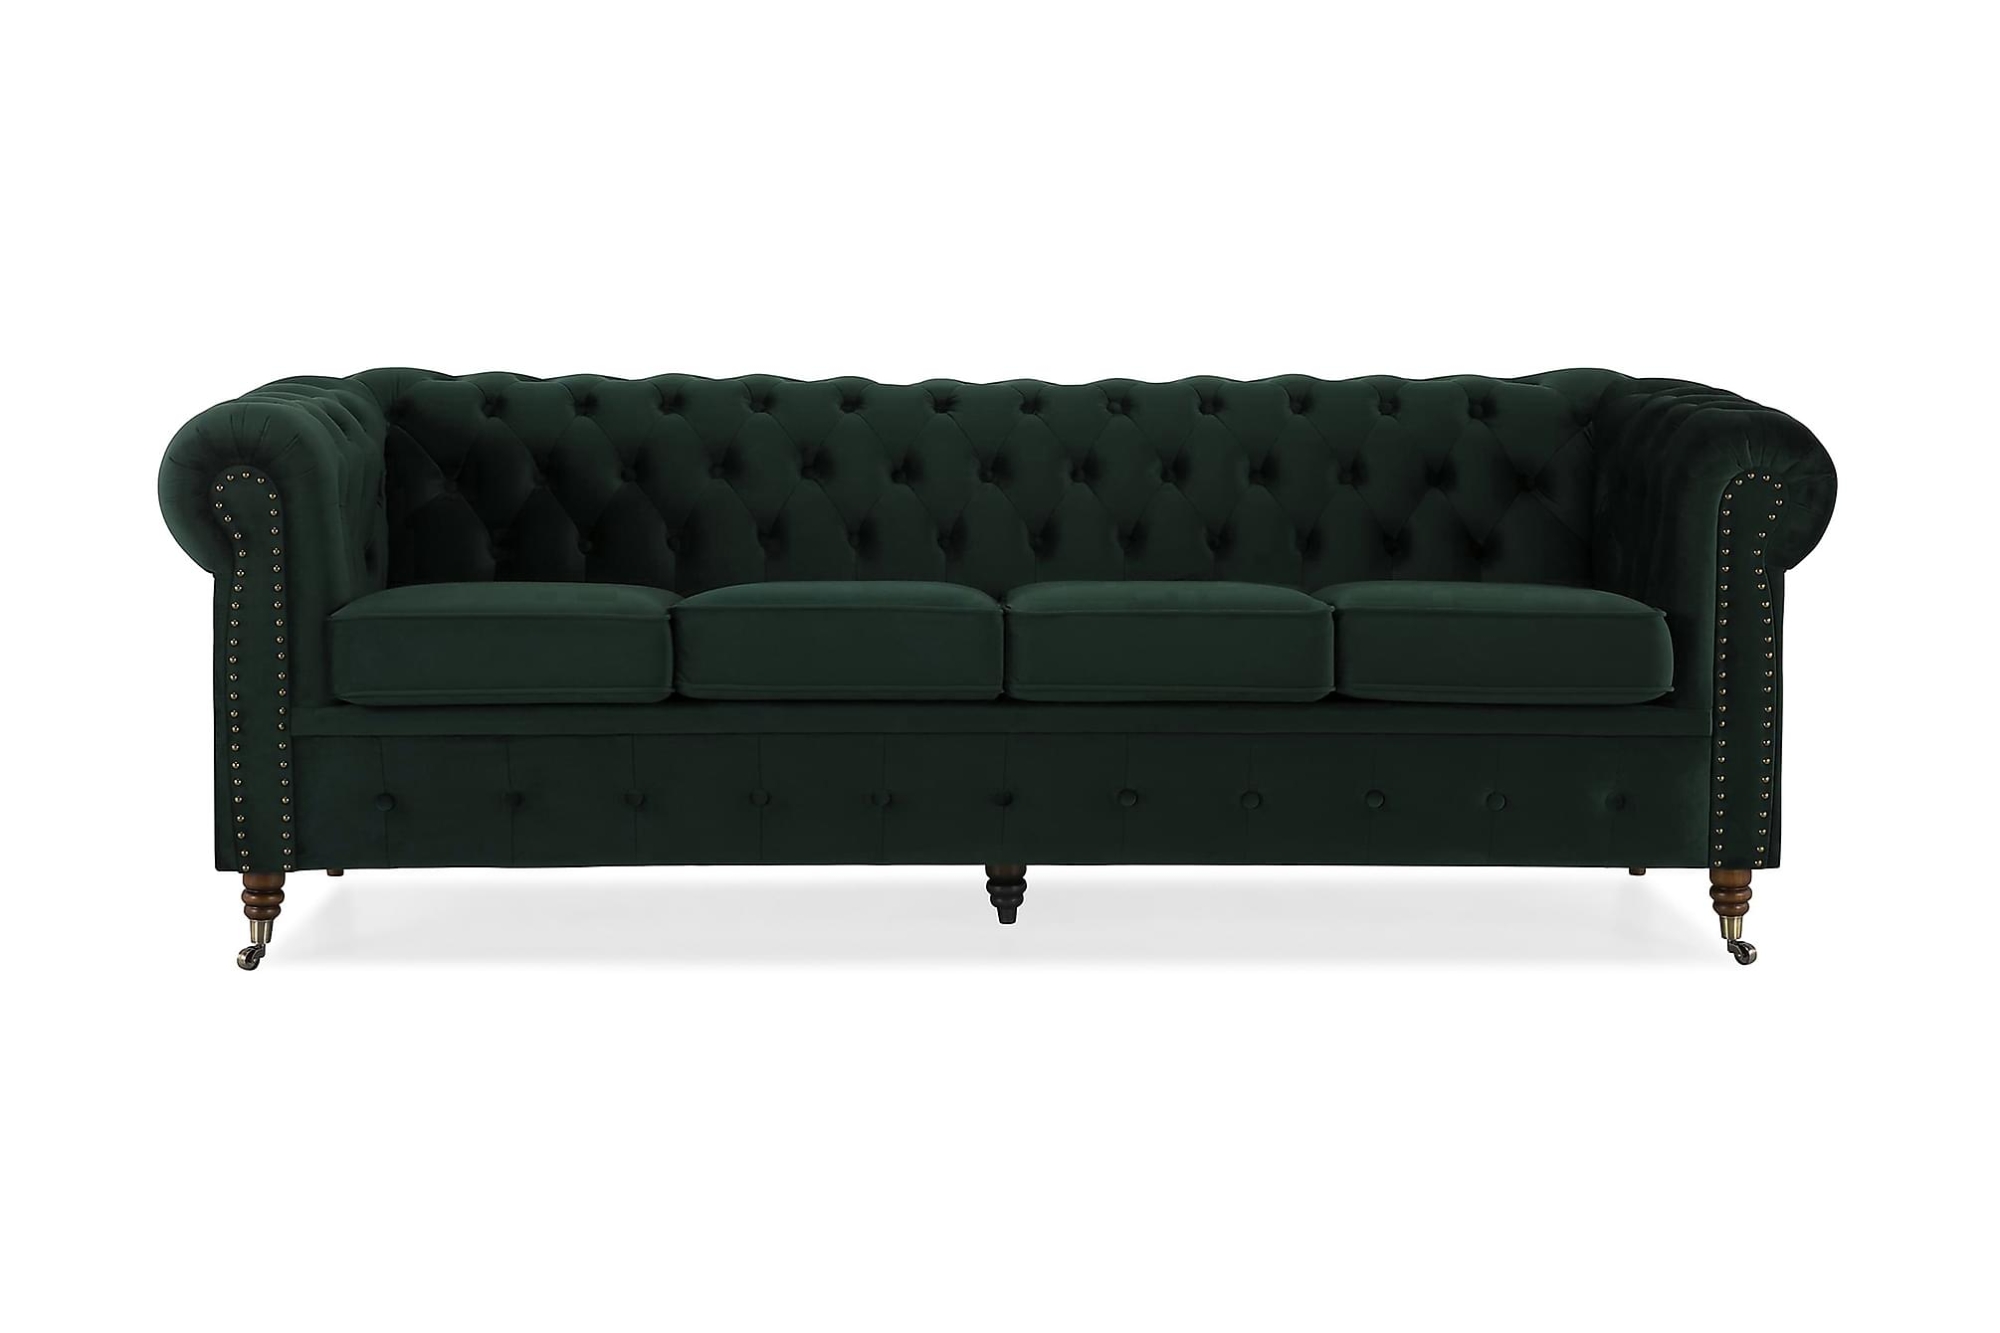 8: Chesterfield Deluxe 4 Pers. Sofa, Grøn Velour